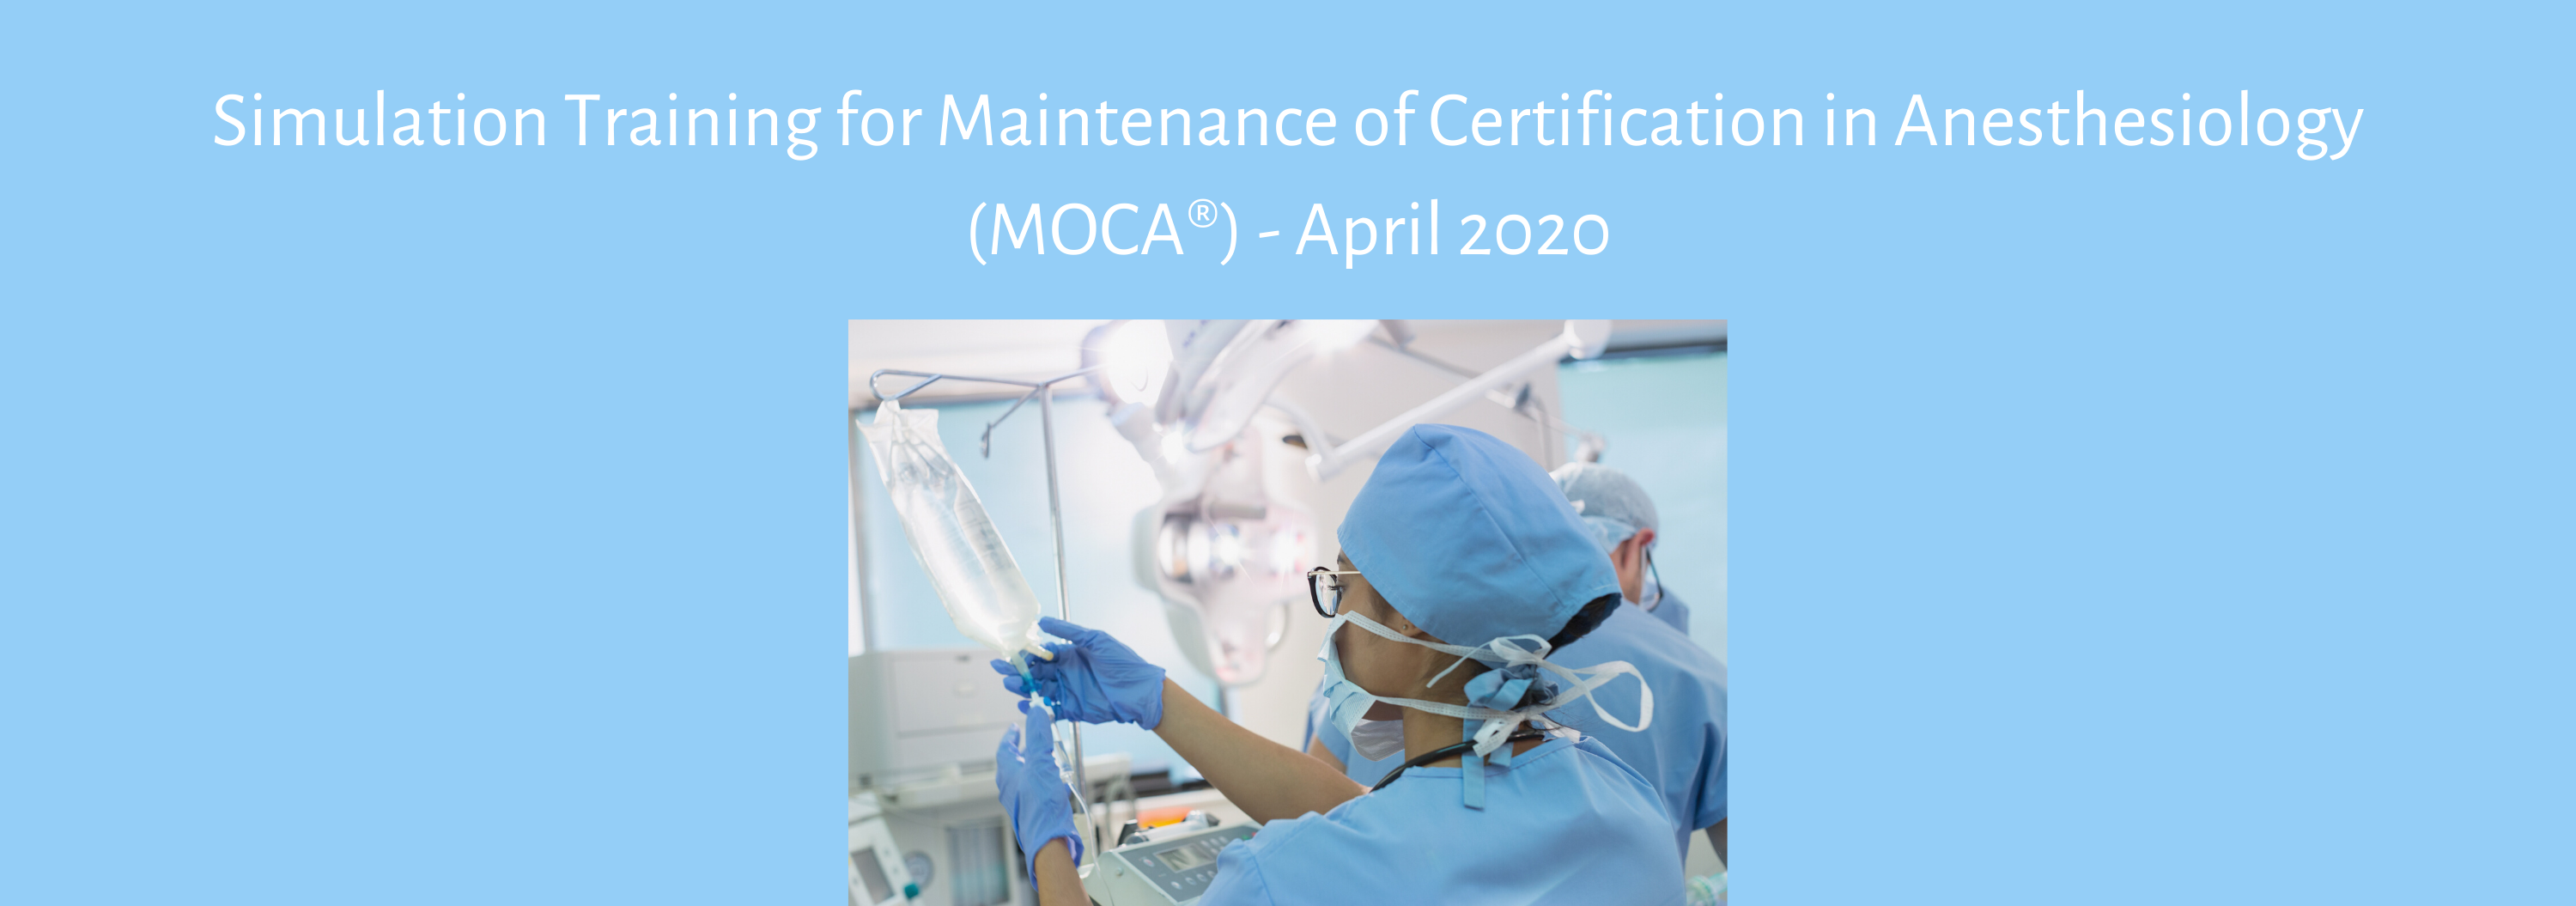 CANCELLED - Simulation Training for Maintenance of Certification in Anesthesiology (MOCA) - April 3, 2020 Banner